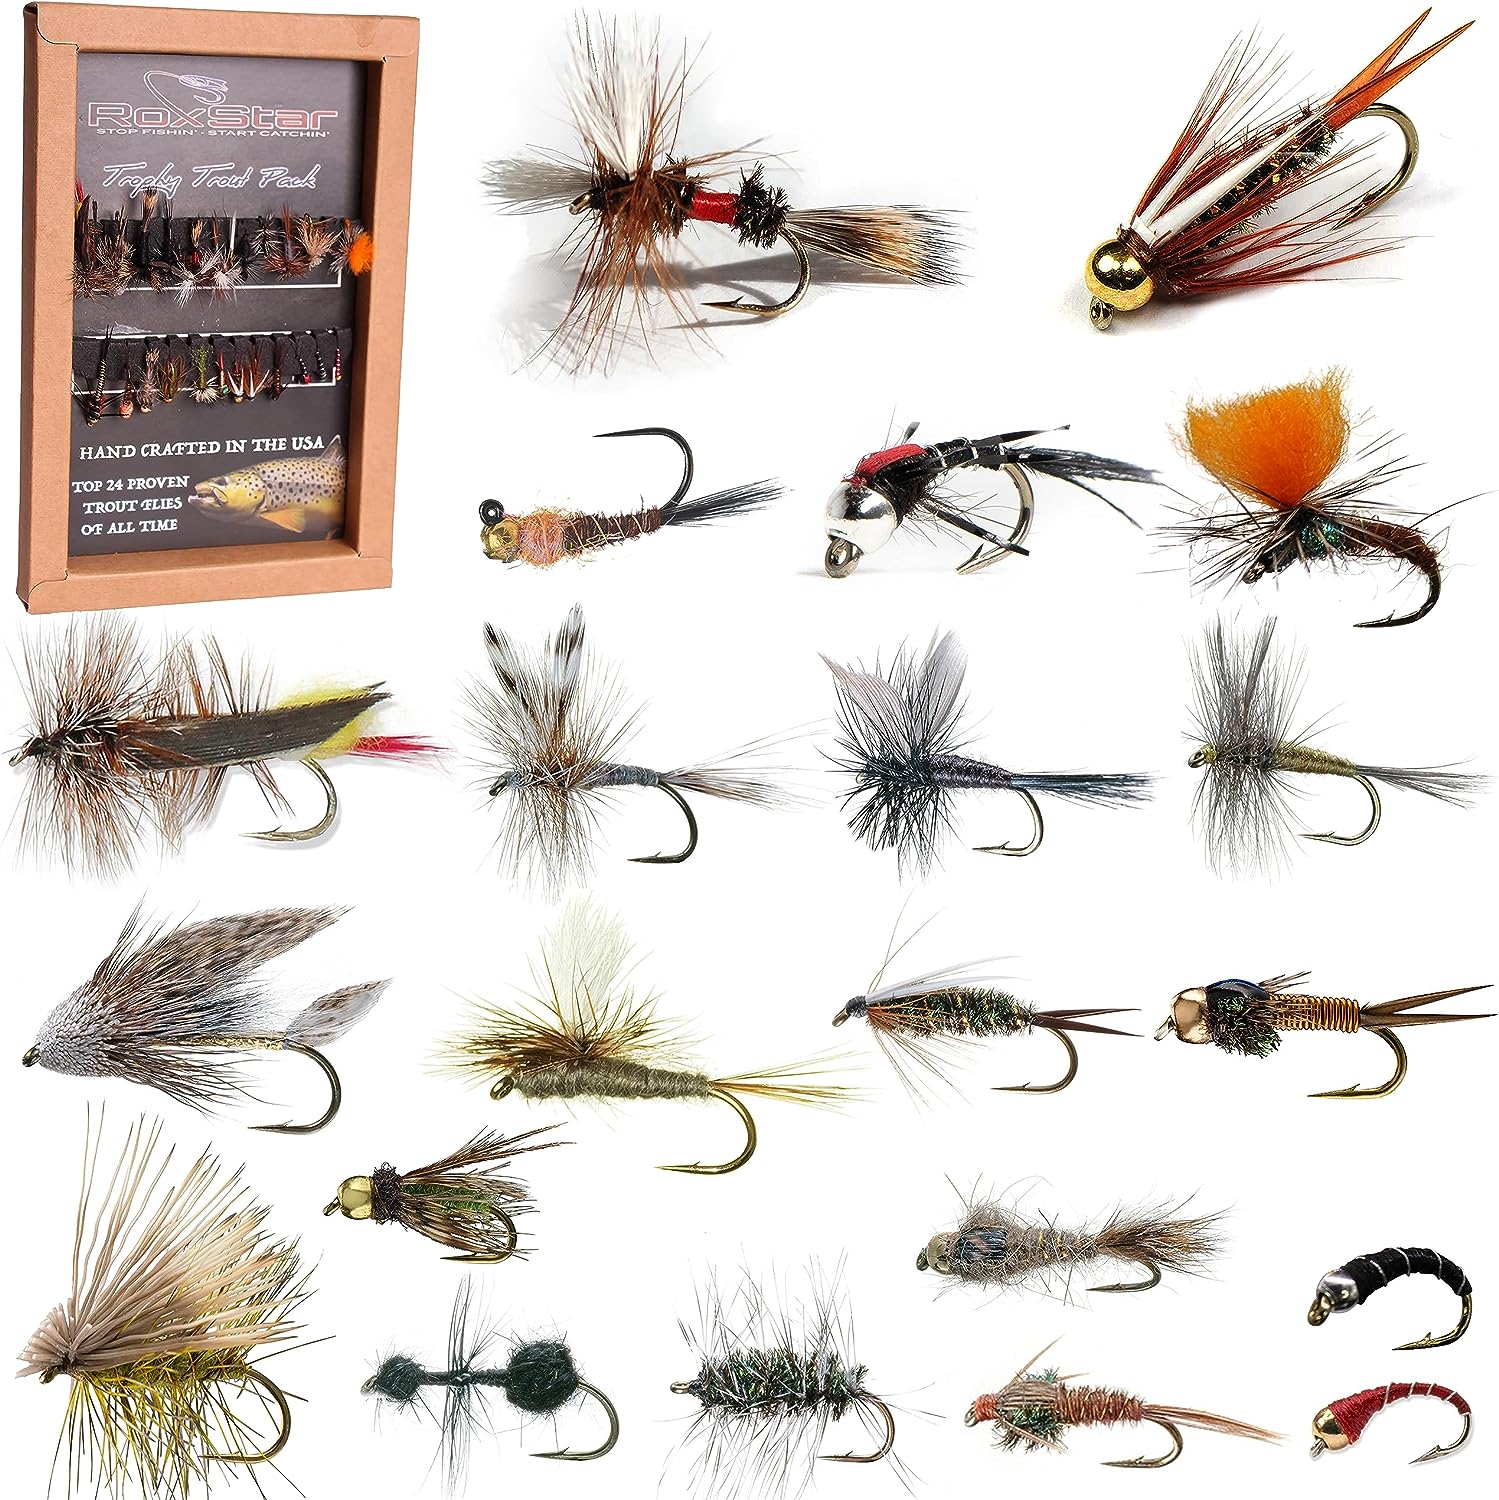 Trophy Trout 24 Pack – RoxStar Fishing